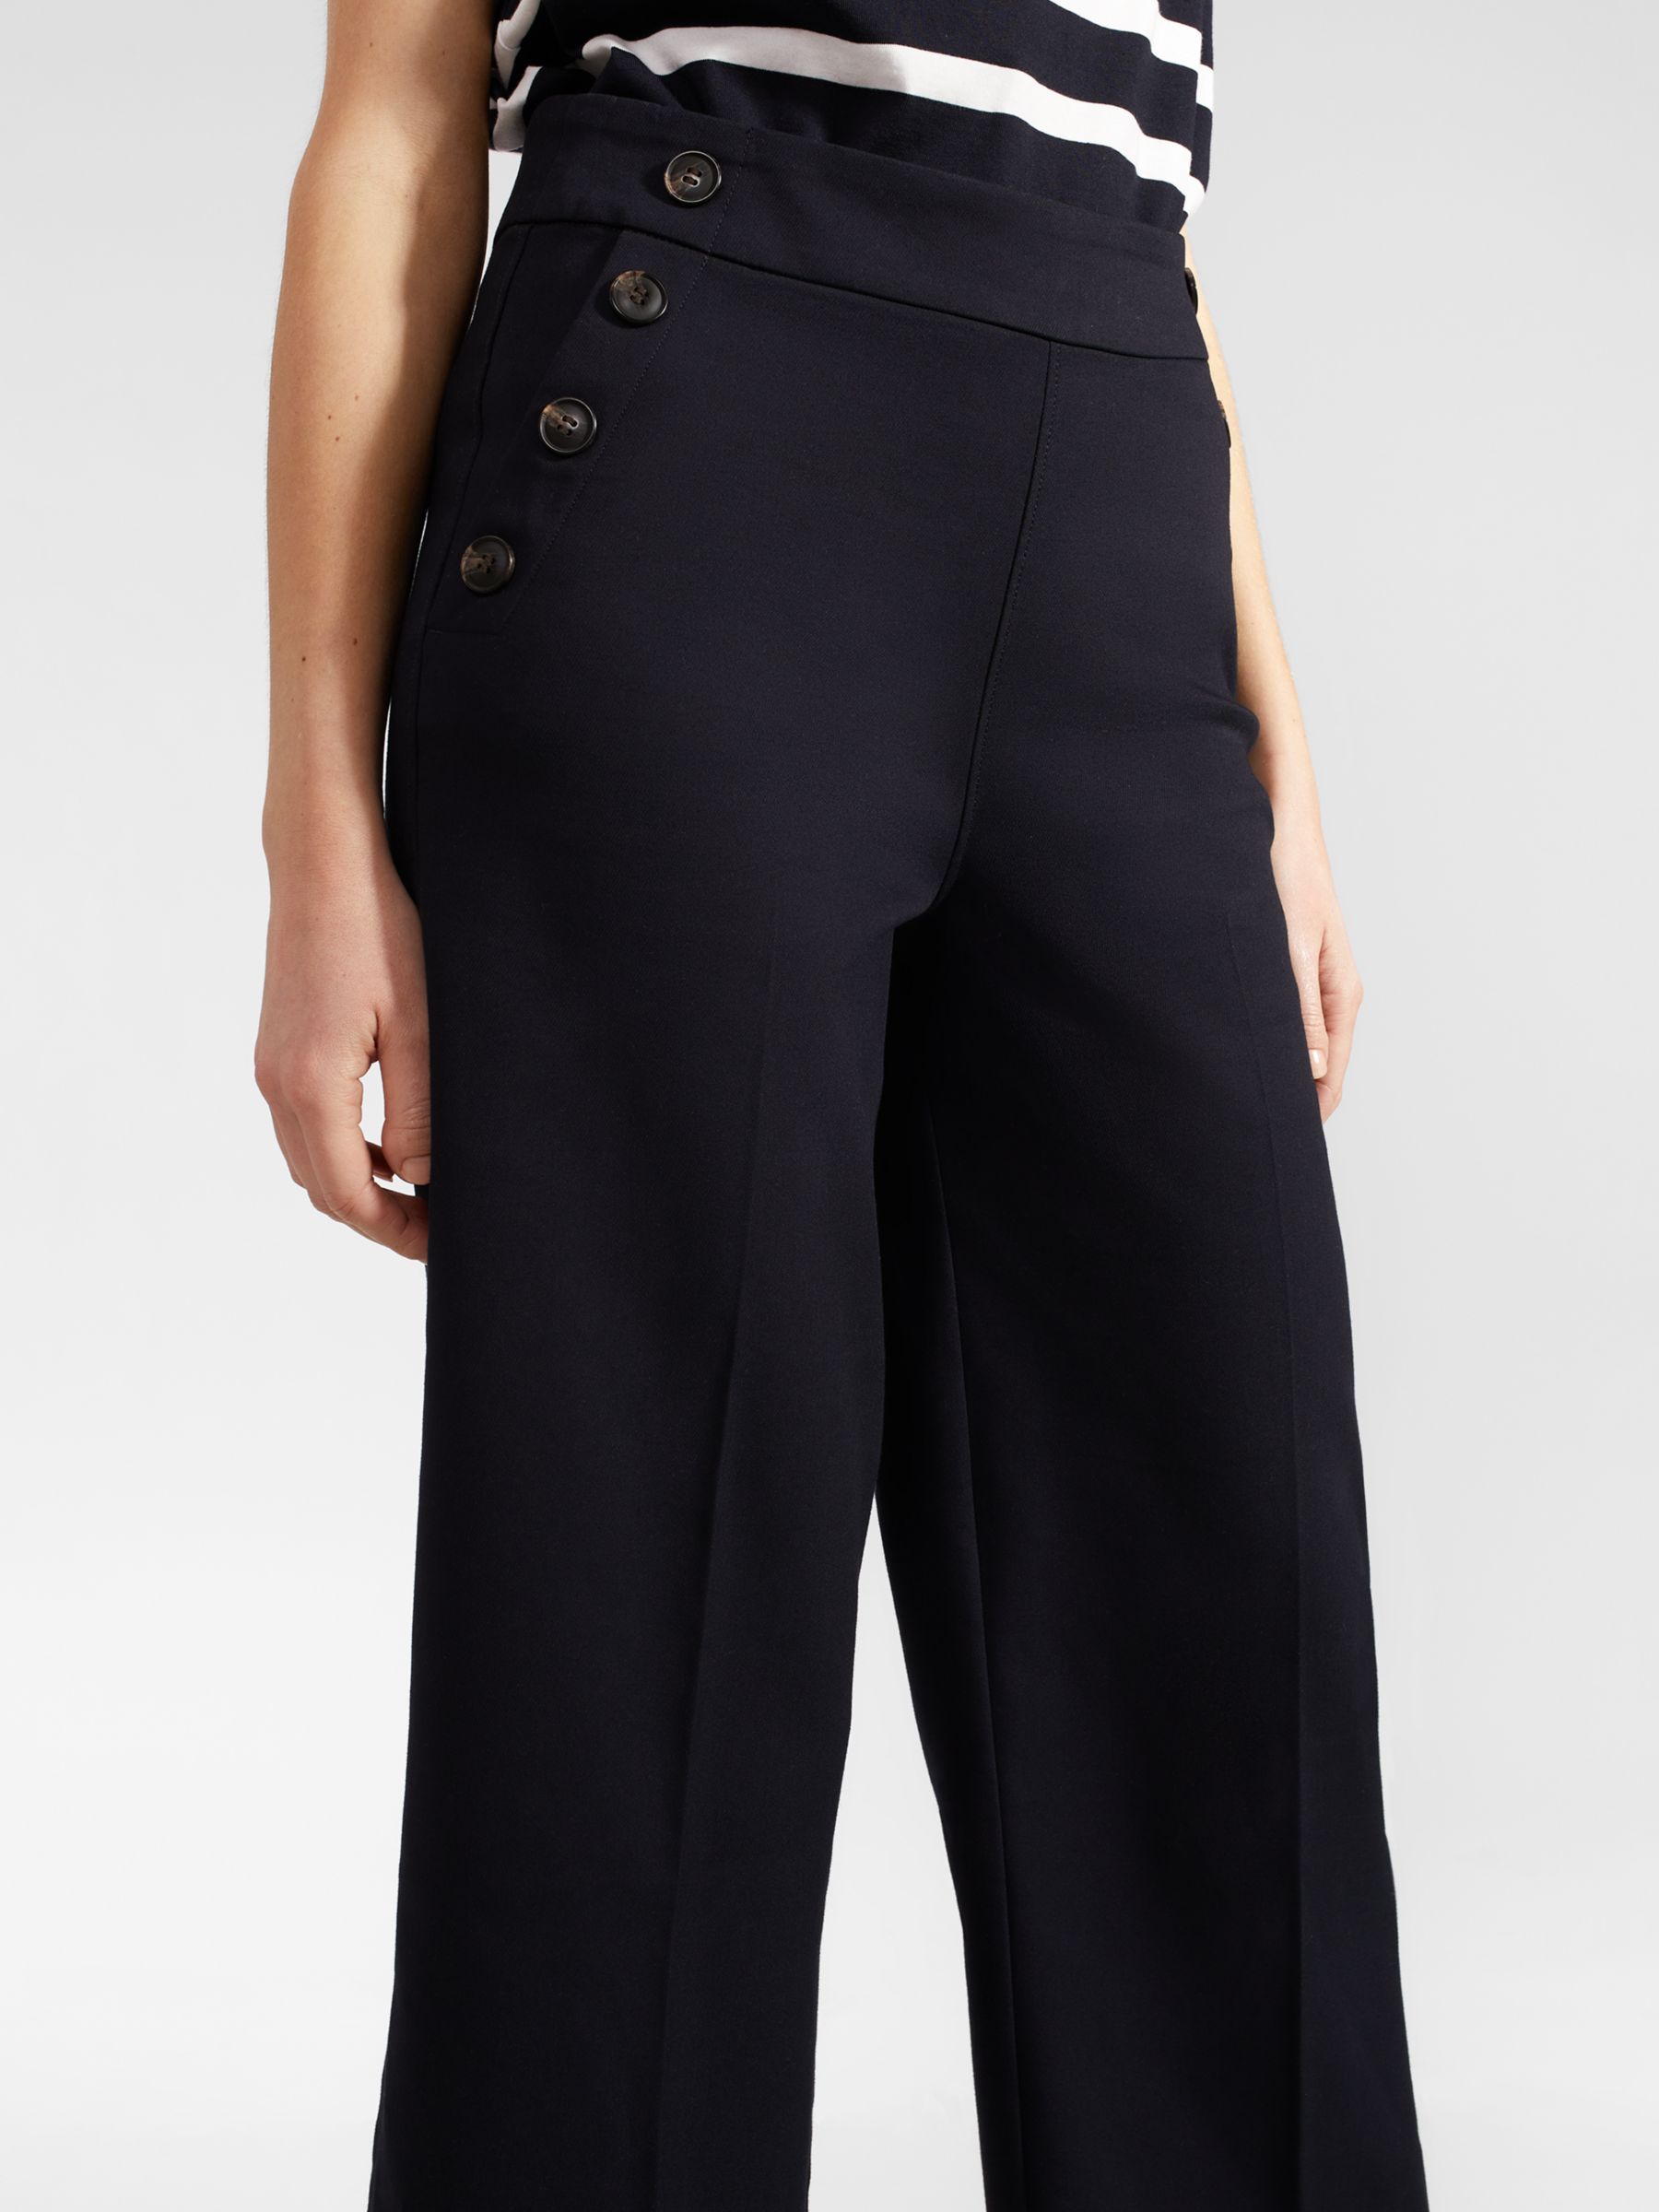 Buy Hobbs Simone Cropped Trousers, Navy Online at johnlewis.com